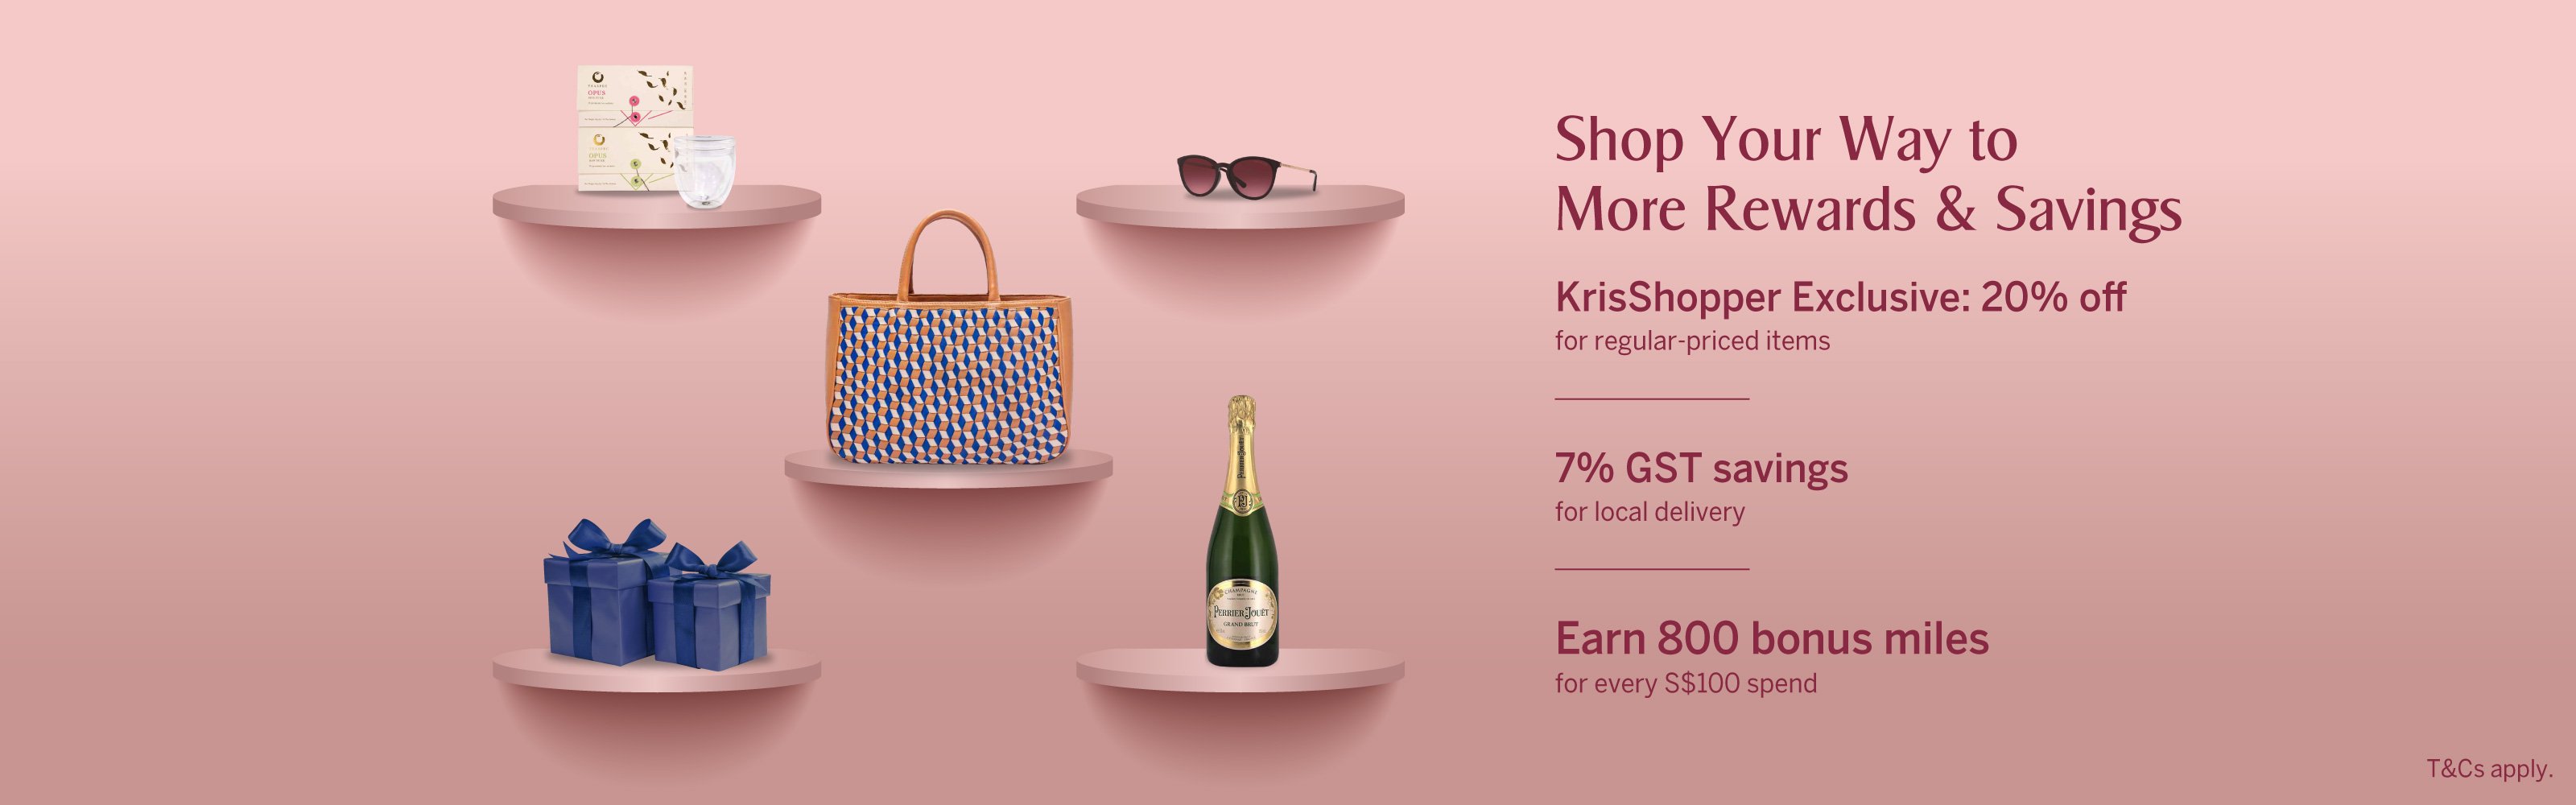 KrisShop May Savings - Up to 20% off Sitewide & More